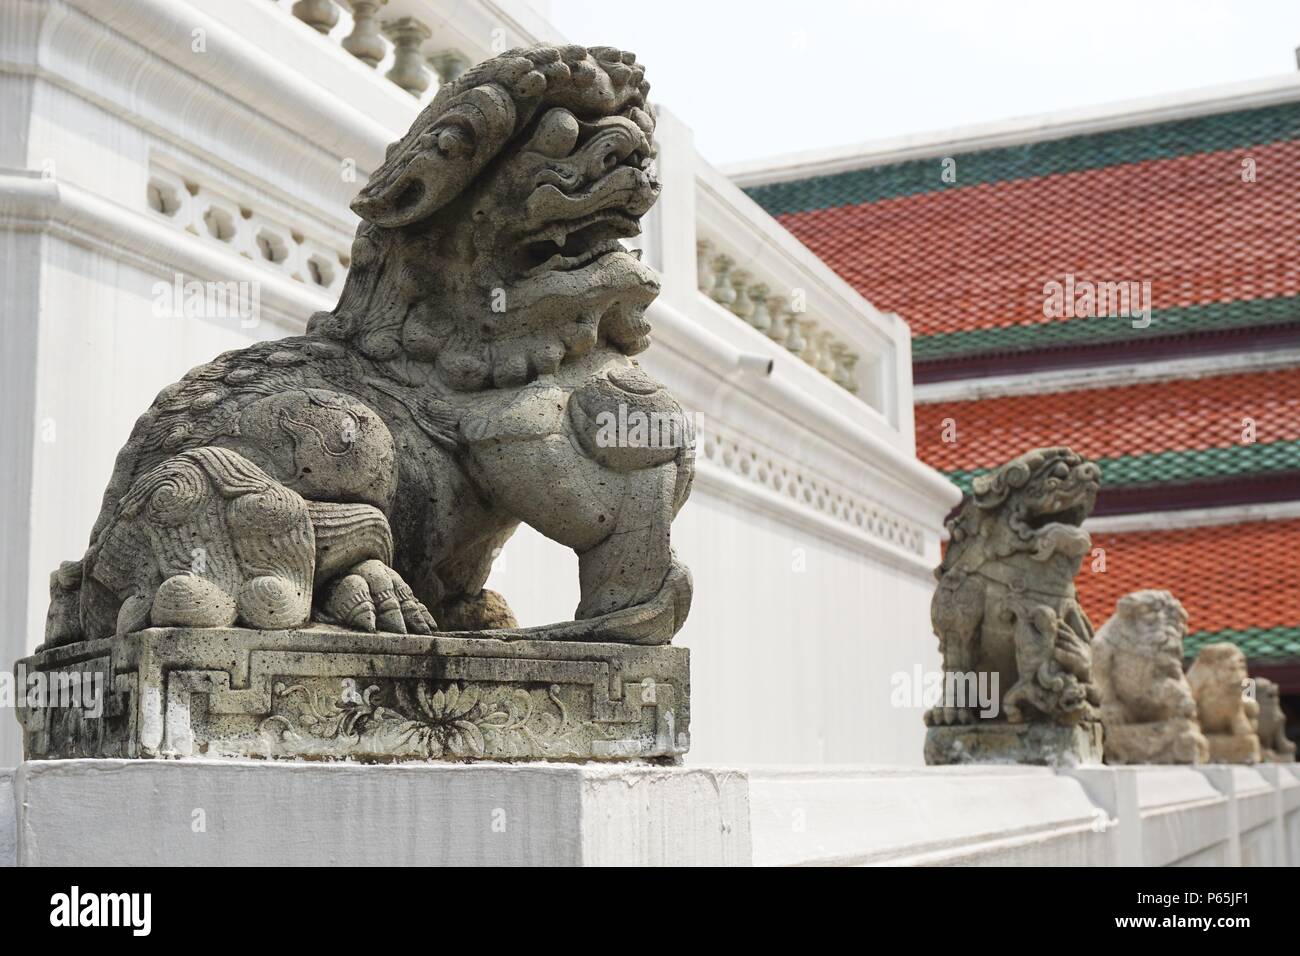 A row of ancient carved stone lions and other statues stand guard on the grounds of the Royal Palace in Bangkok, Thailand on a sunny day Stock Photo